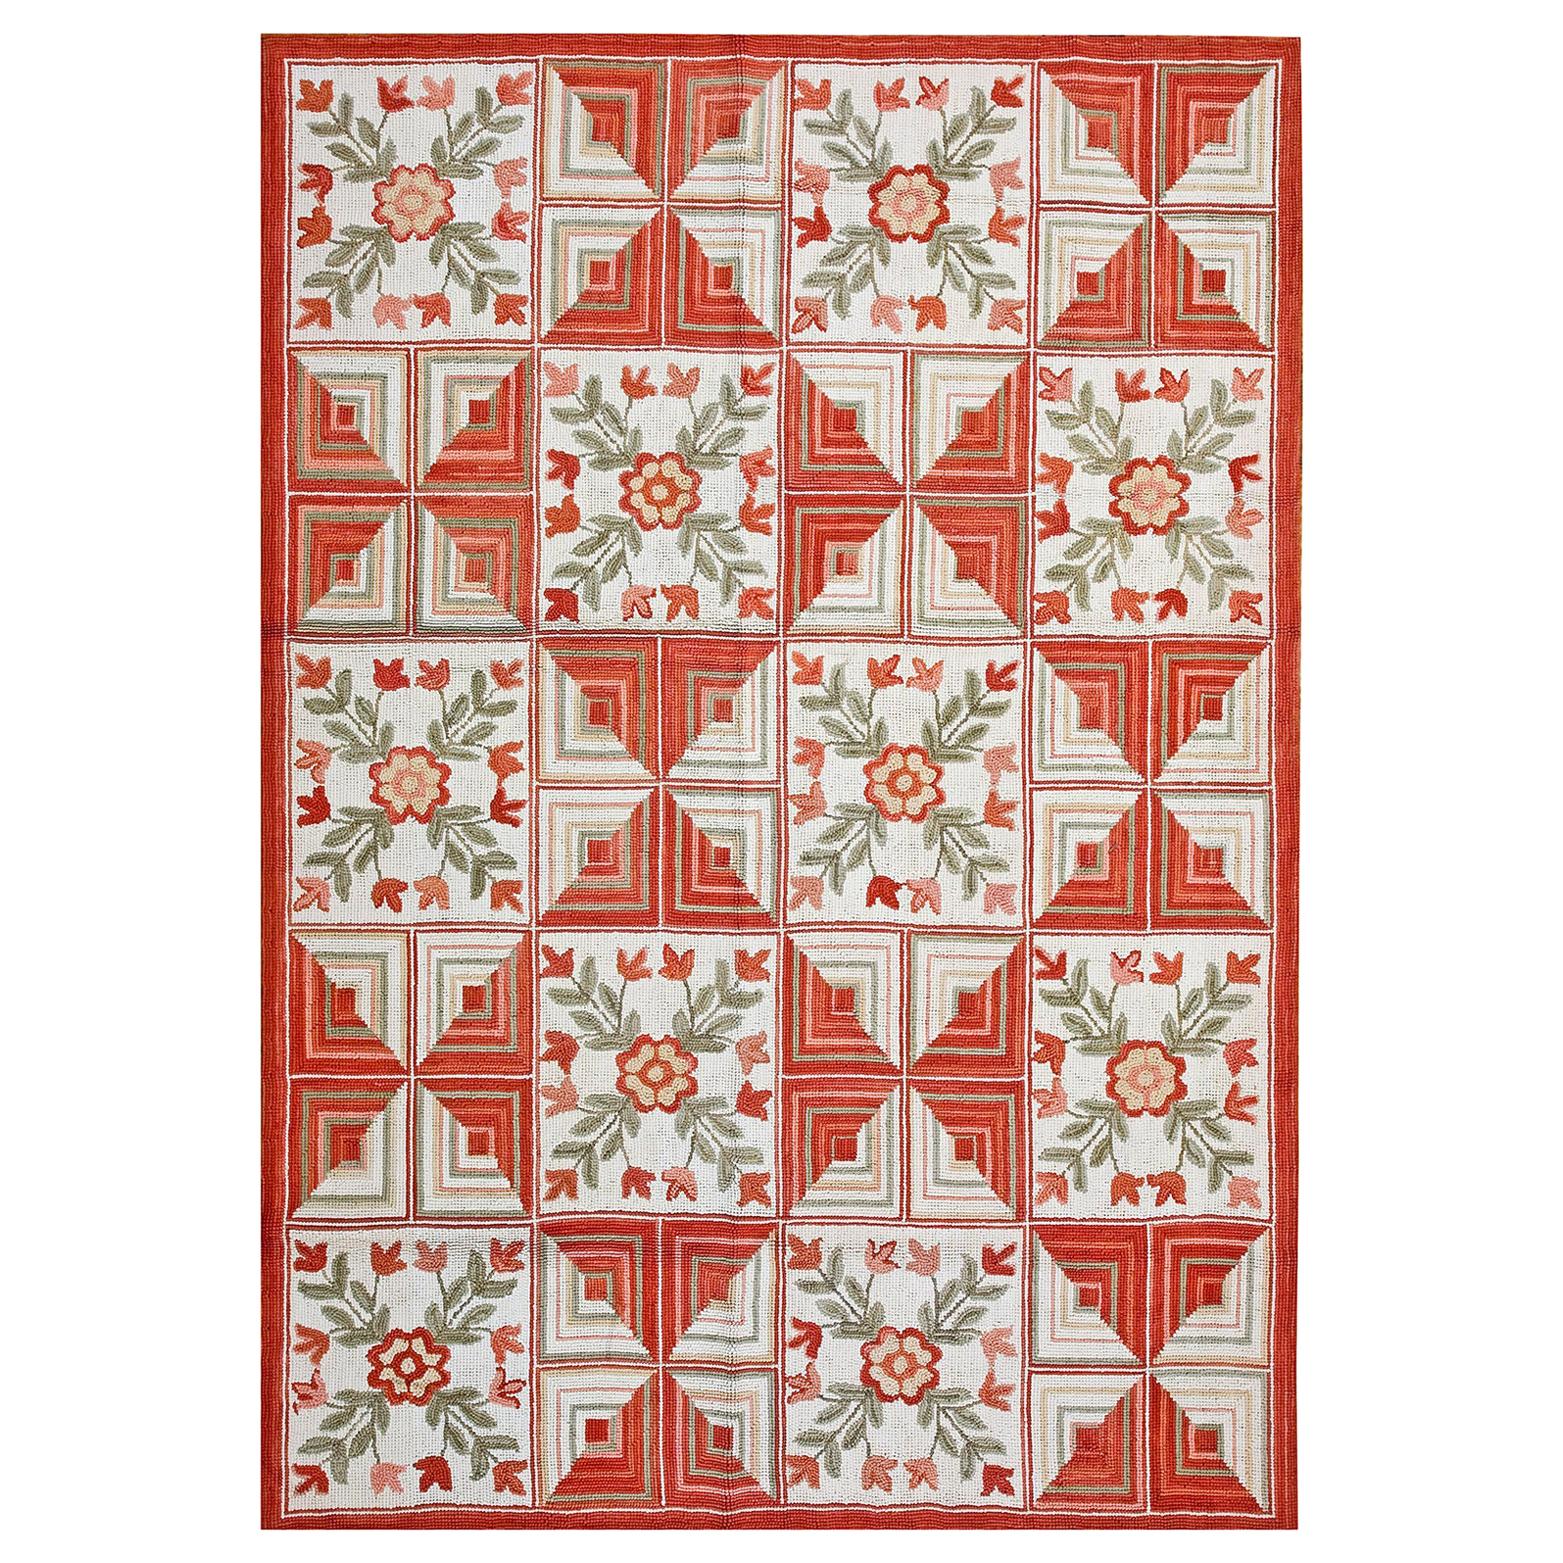 Contemporary American Hooked Rug (6' x 9' - 183x 274) For Sale